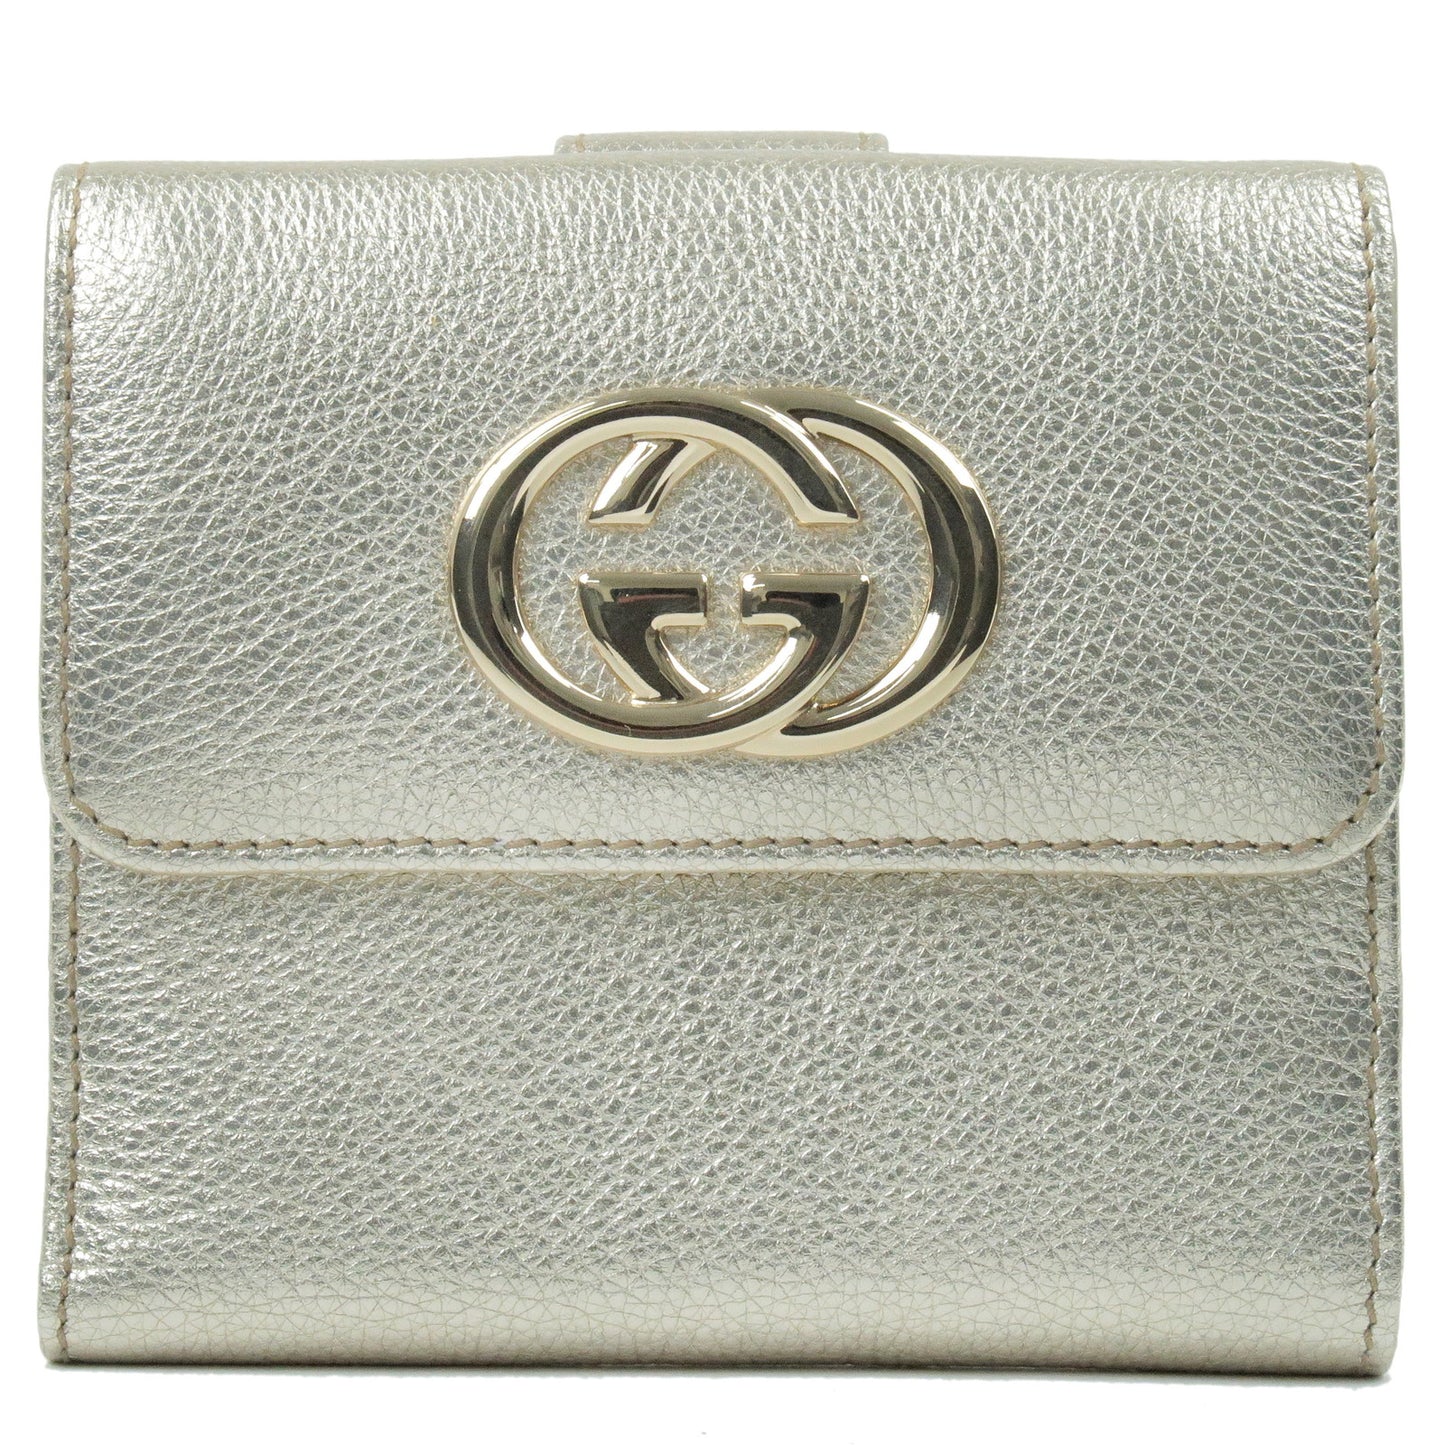 GUCCI-Interlocking-G-Leather-Double-Hook-Wallet-Gold-162759